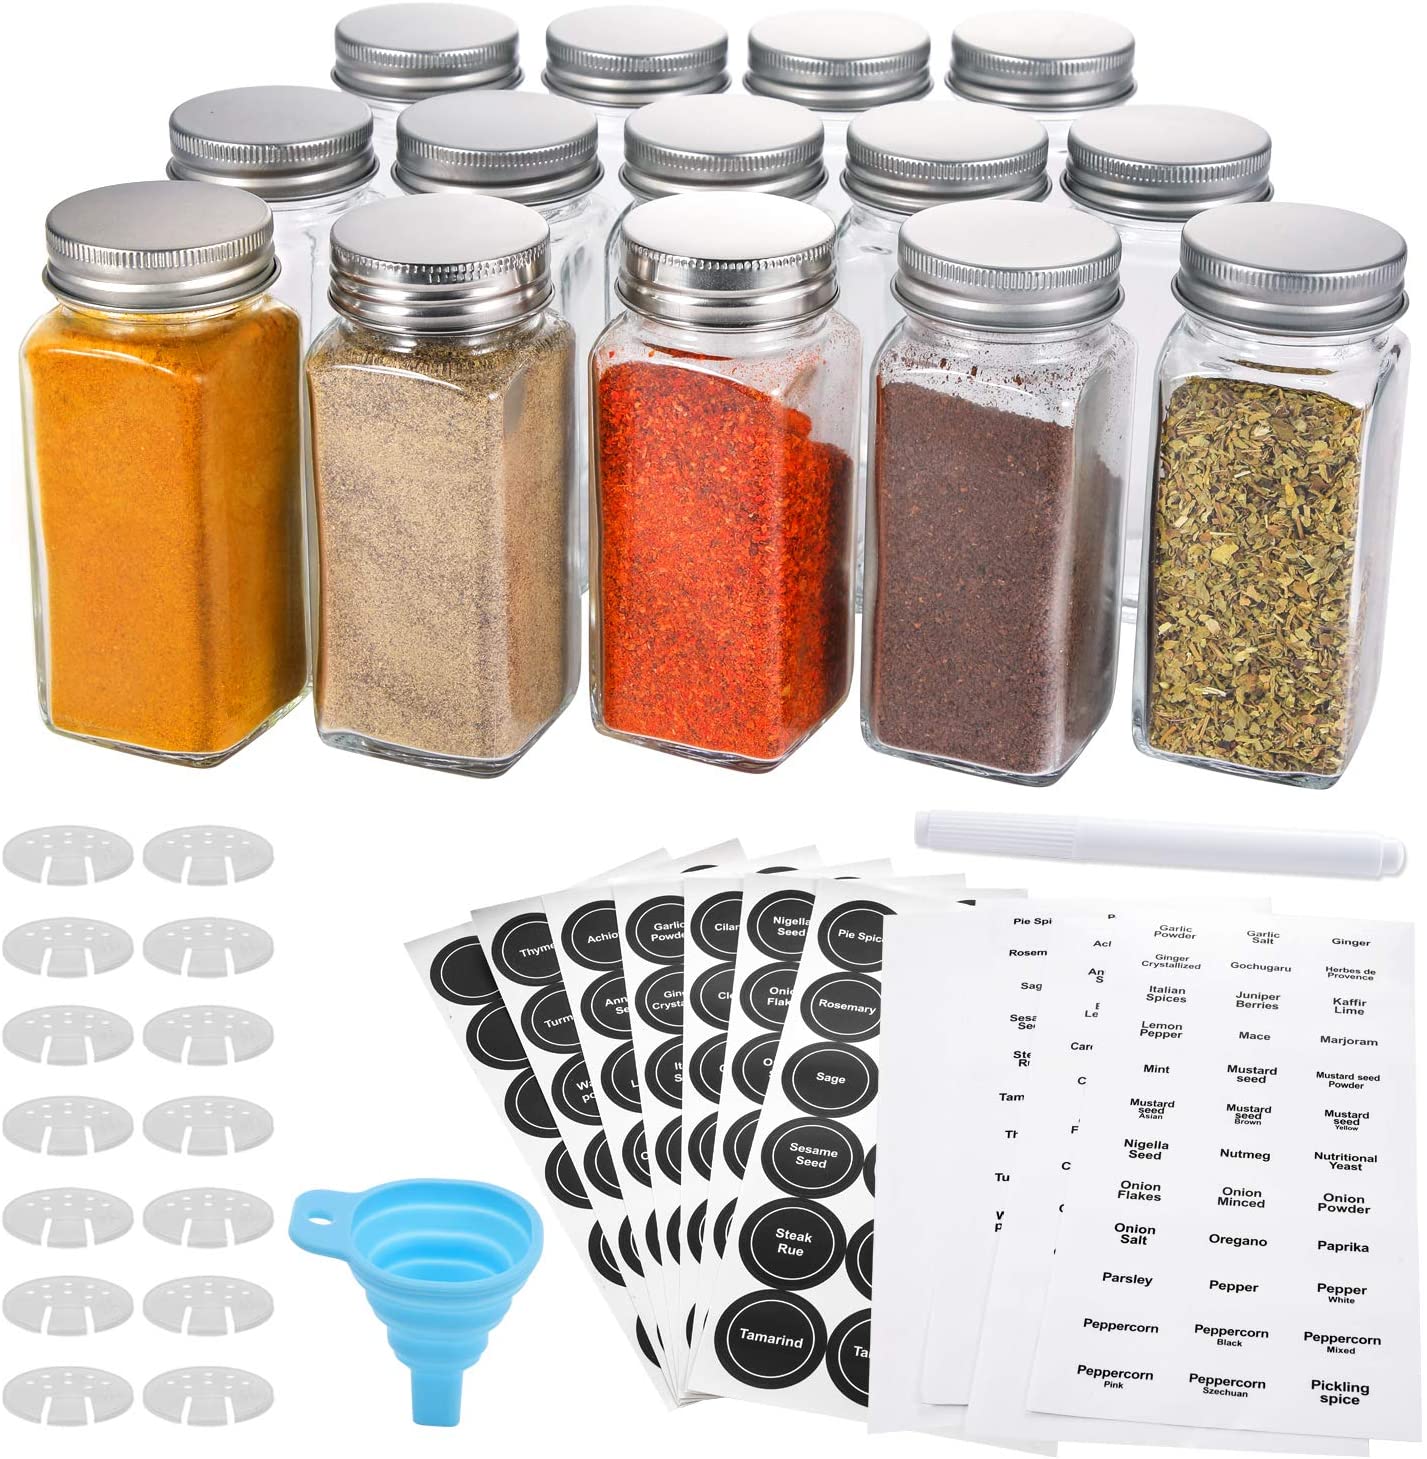 6oz, BEST VALUE 14 Glass Spice Jars includes pre-printed Spice Labels. 14  Square Empty Jars